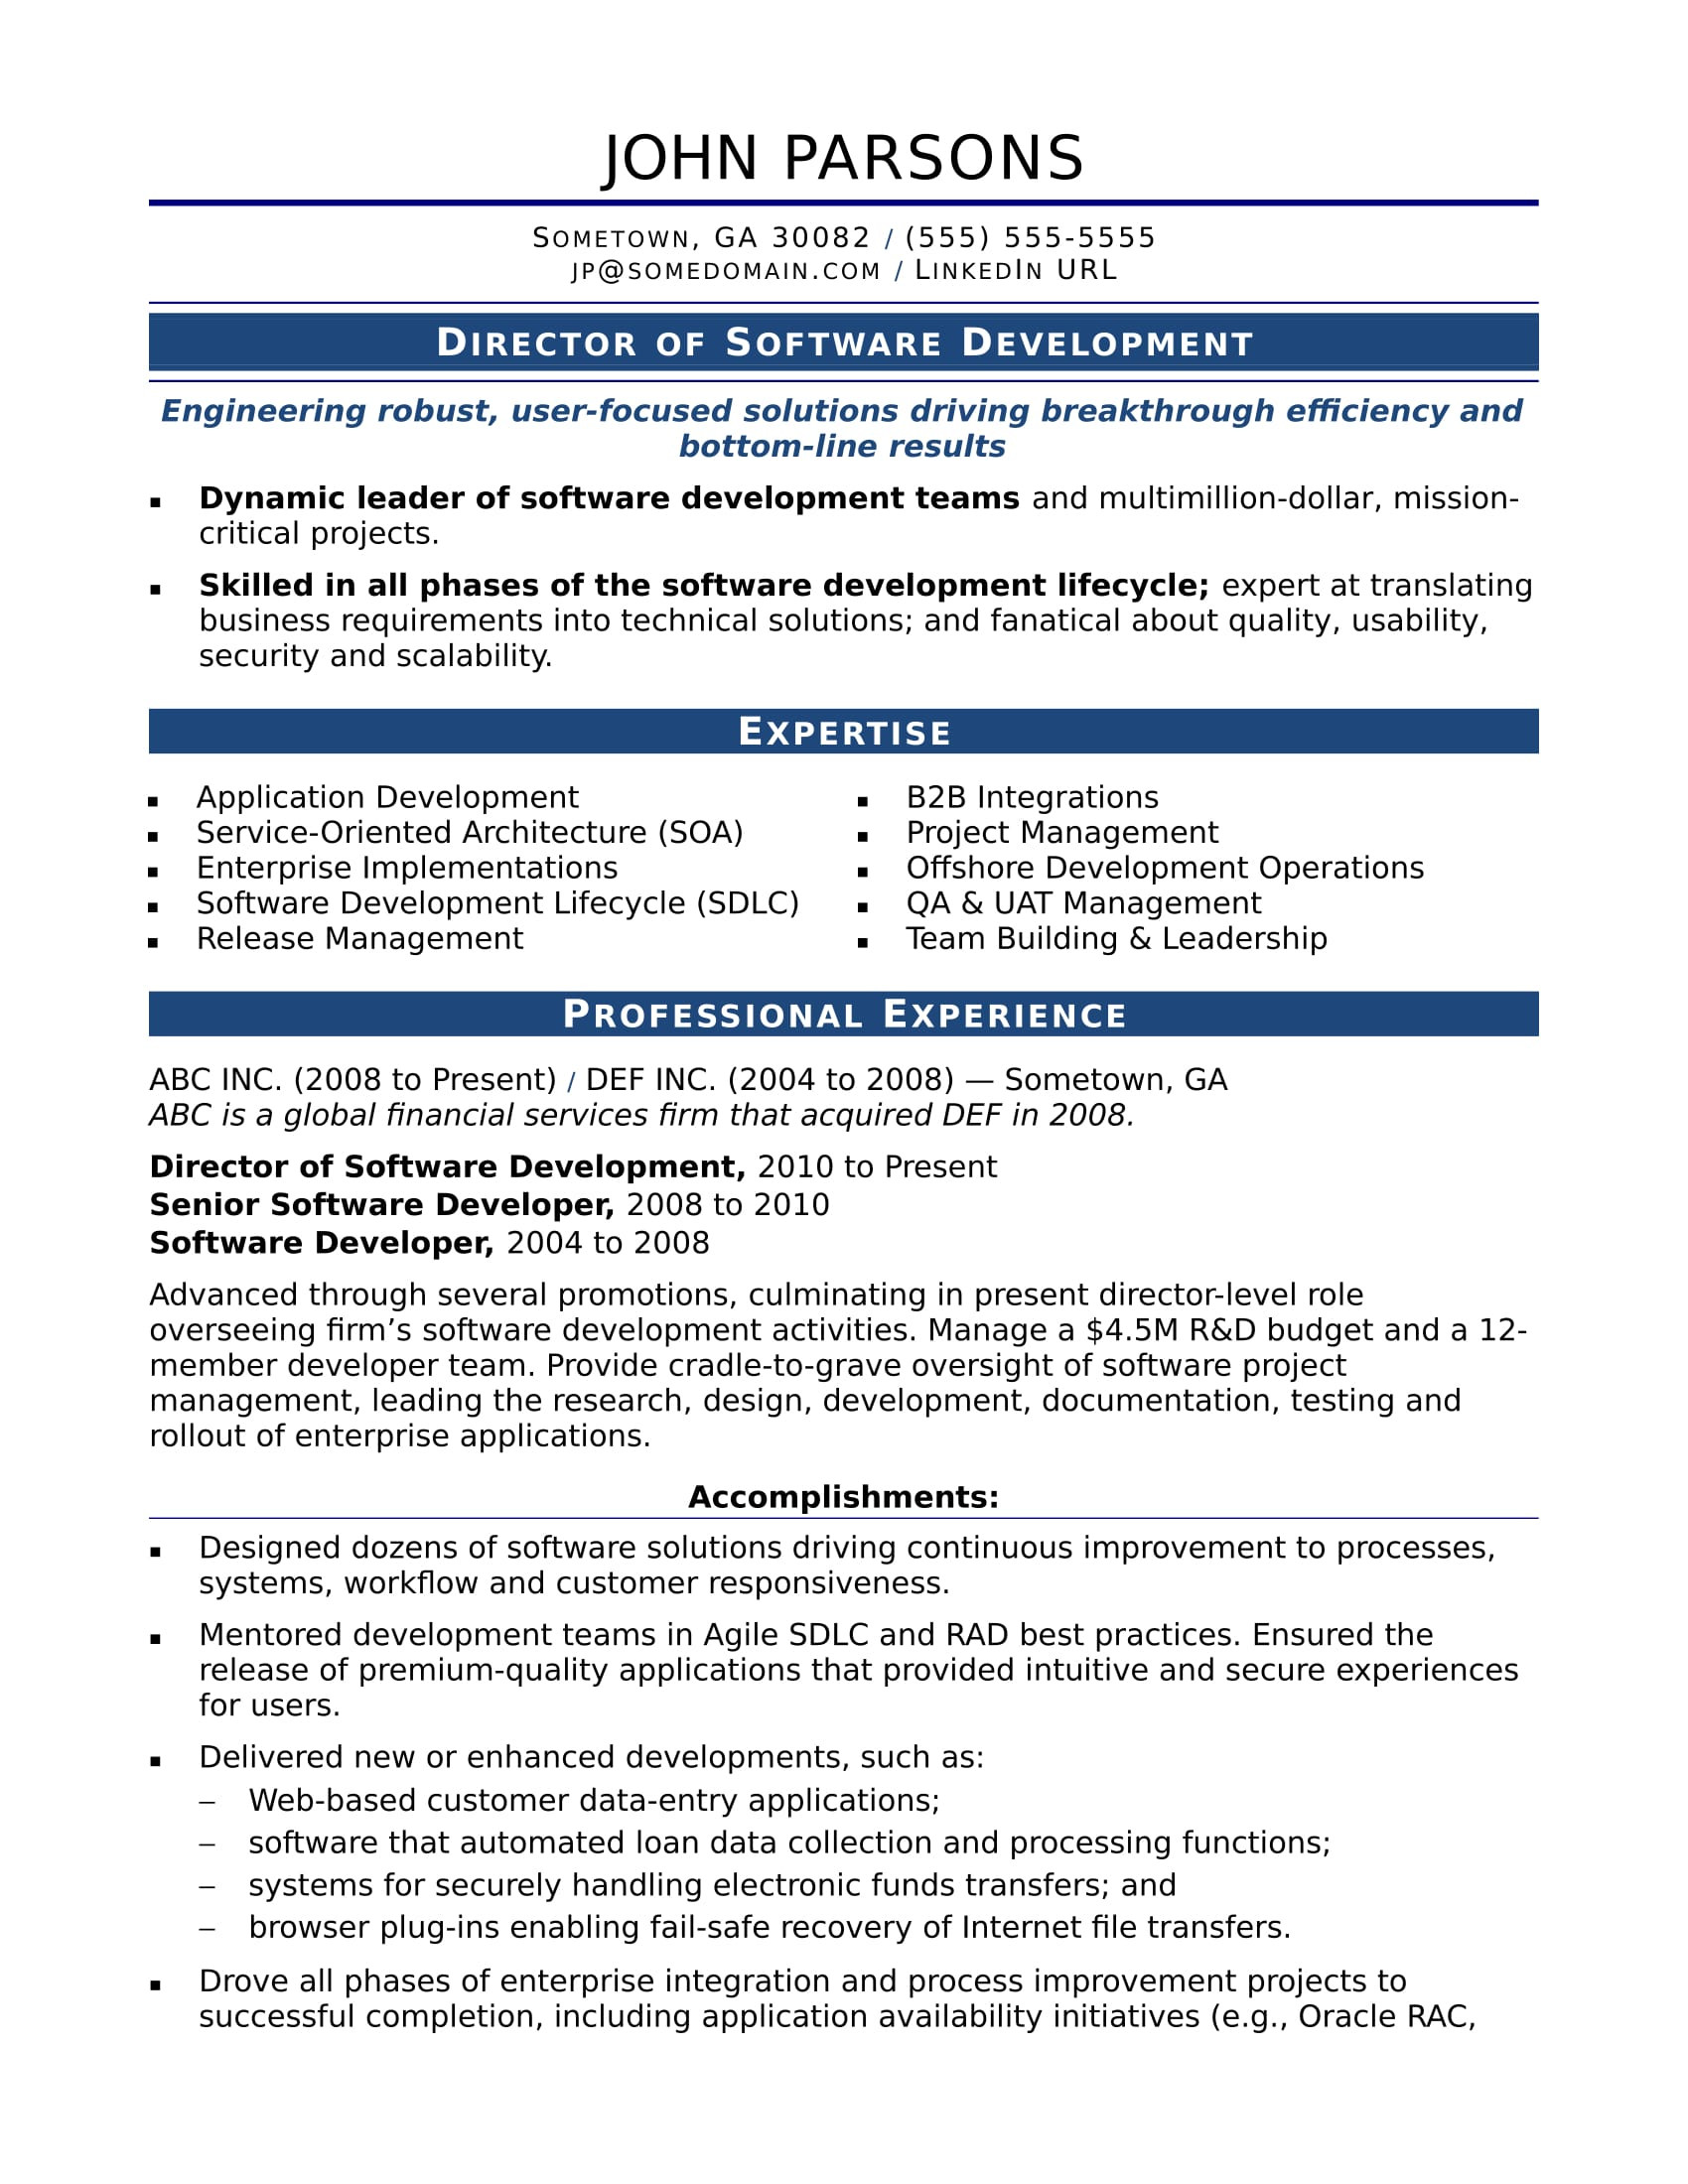 Sample Resume 1 Year Experienced software Engineer Sample Resume for An Experienced It Developer Monster.com